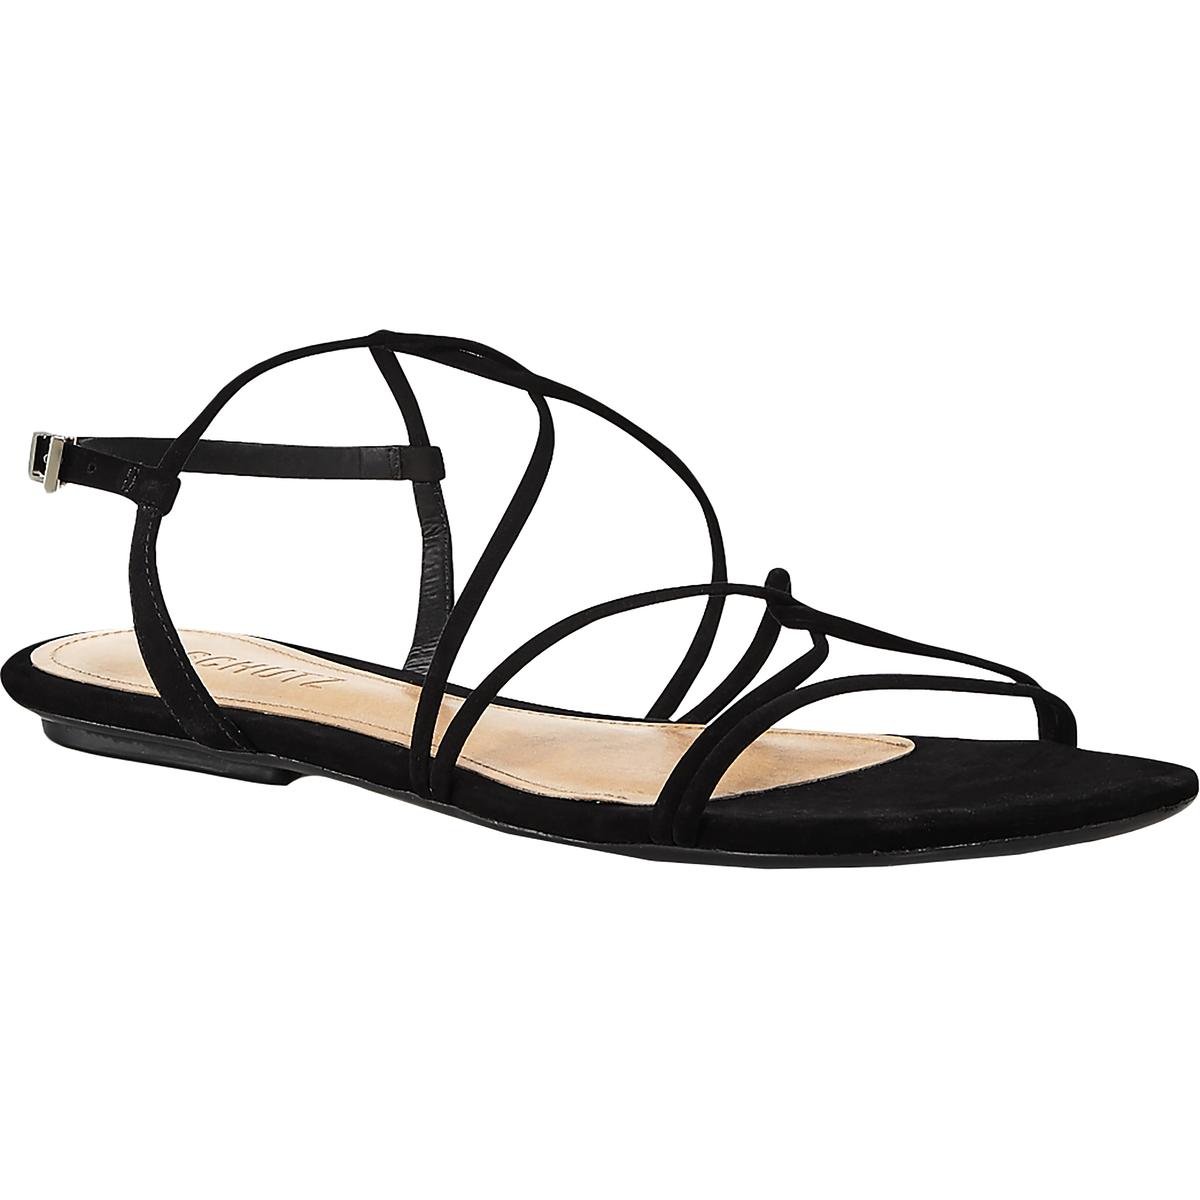 Schutz Womens Leather Strappy Ankle Flat Sandals Shoes BHFO 1944 | eBay